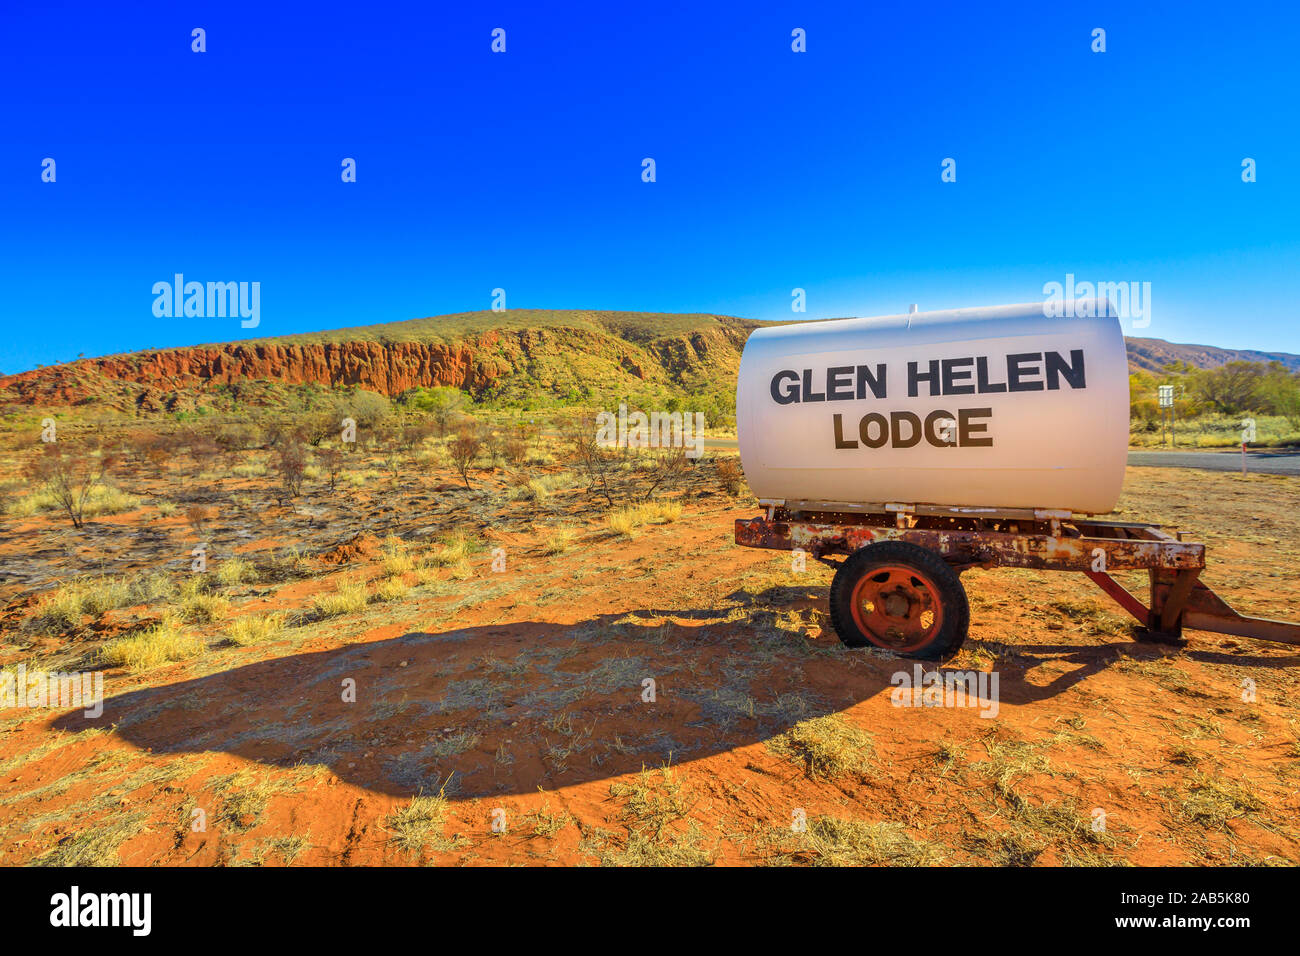 Glen Helen, Northern Territory, Australia - Aug 17, 2019: Glen Helen Lodge sign along Red Centre Way is only accommodation in Tjoritja - West Stock Photo